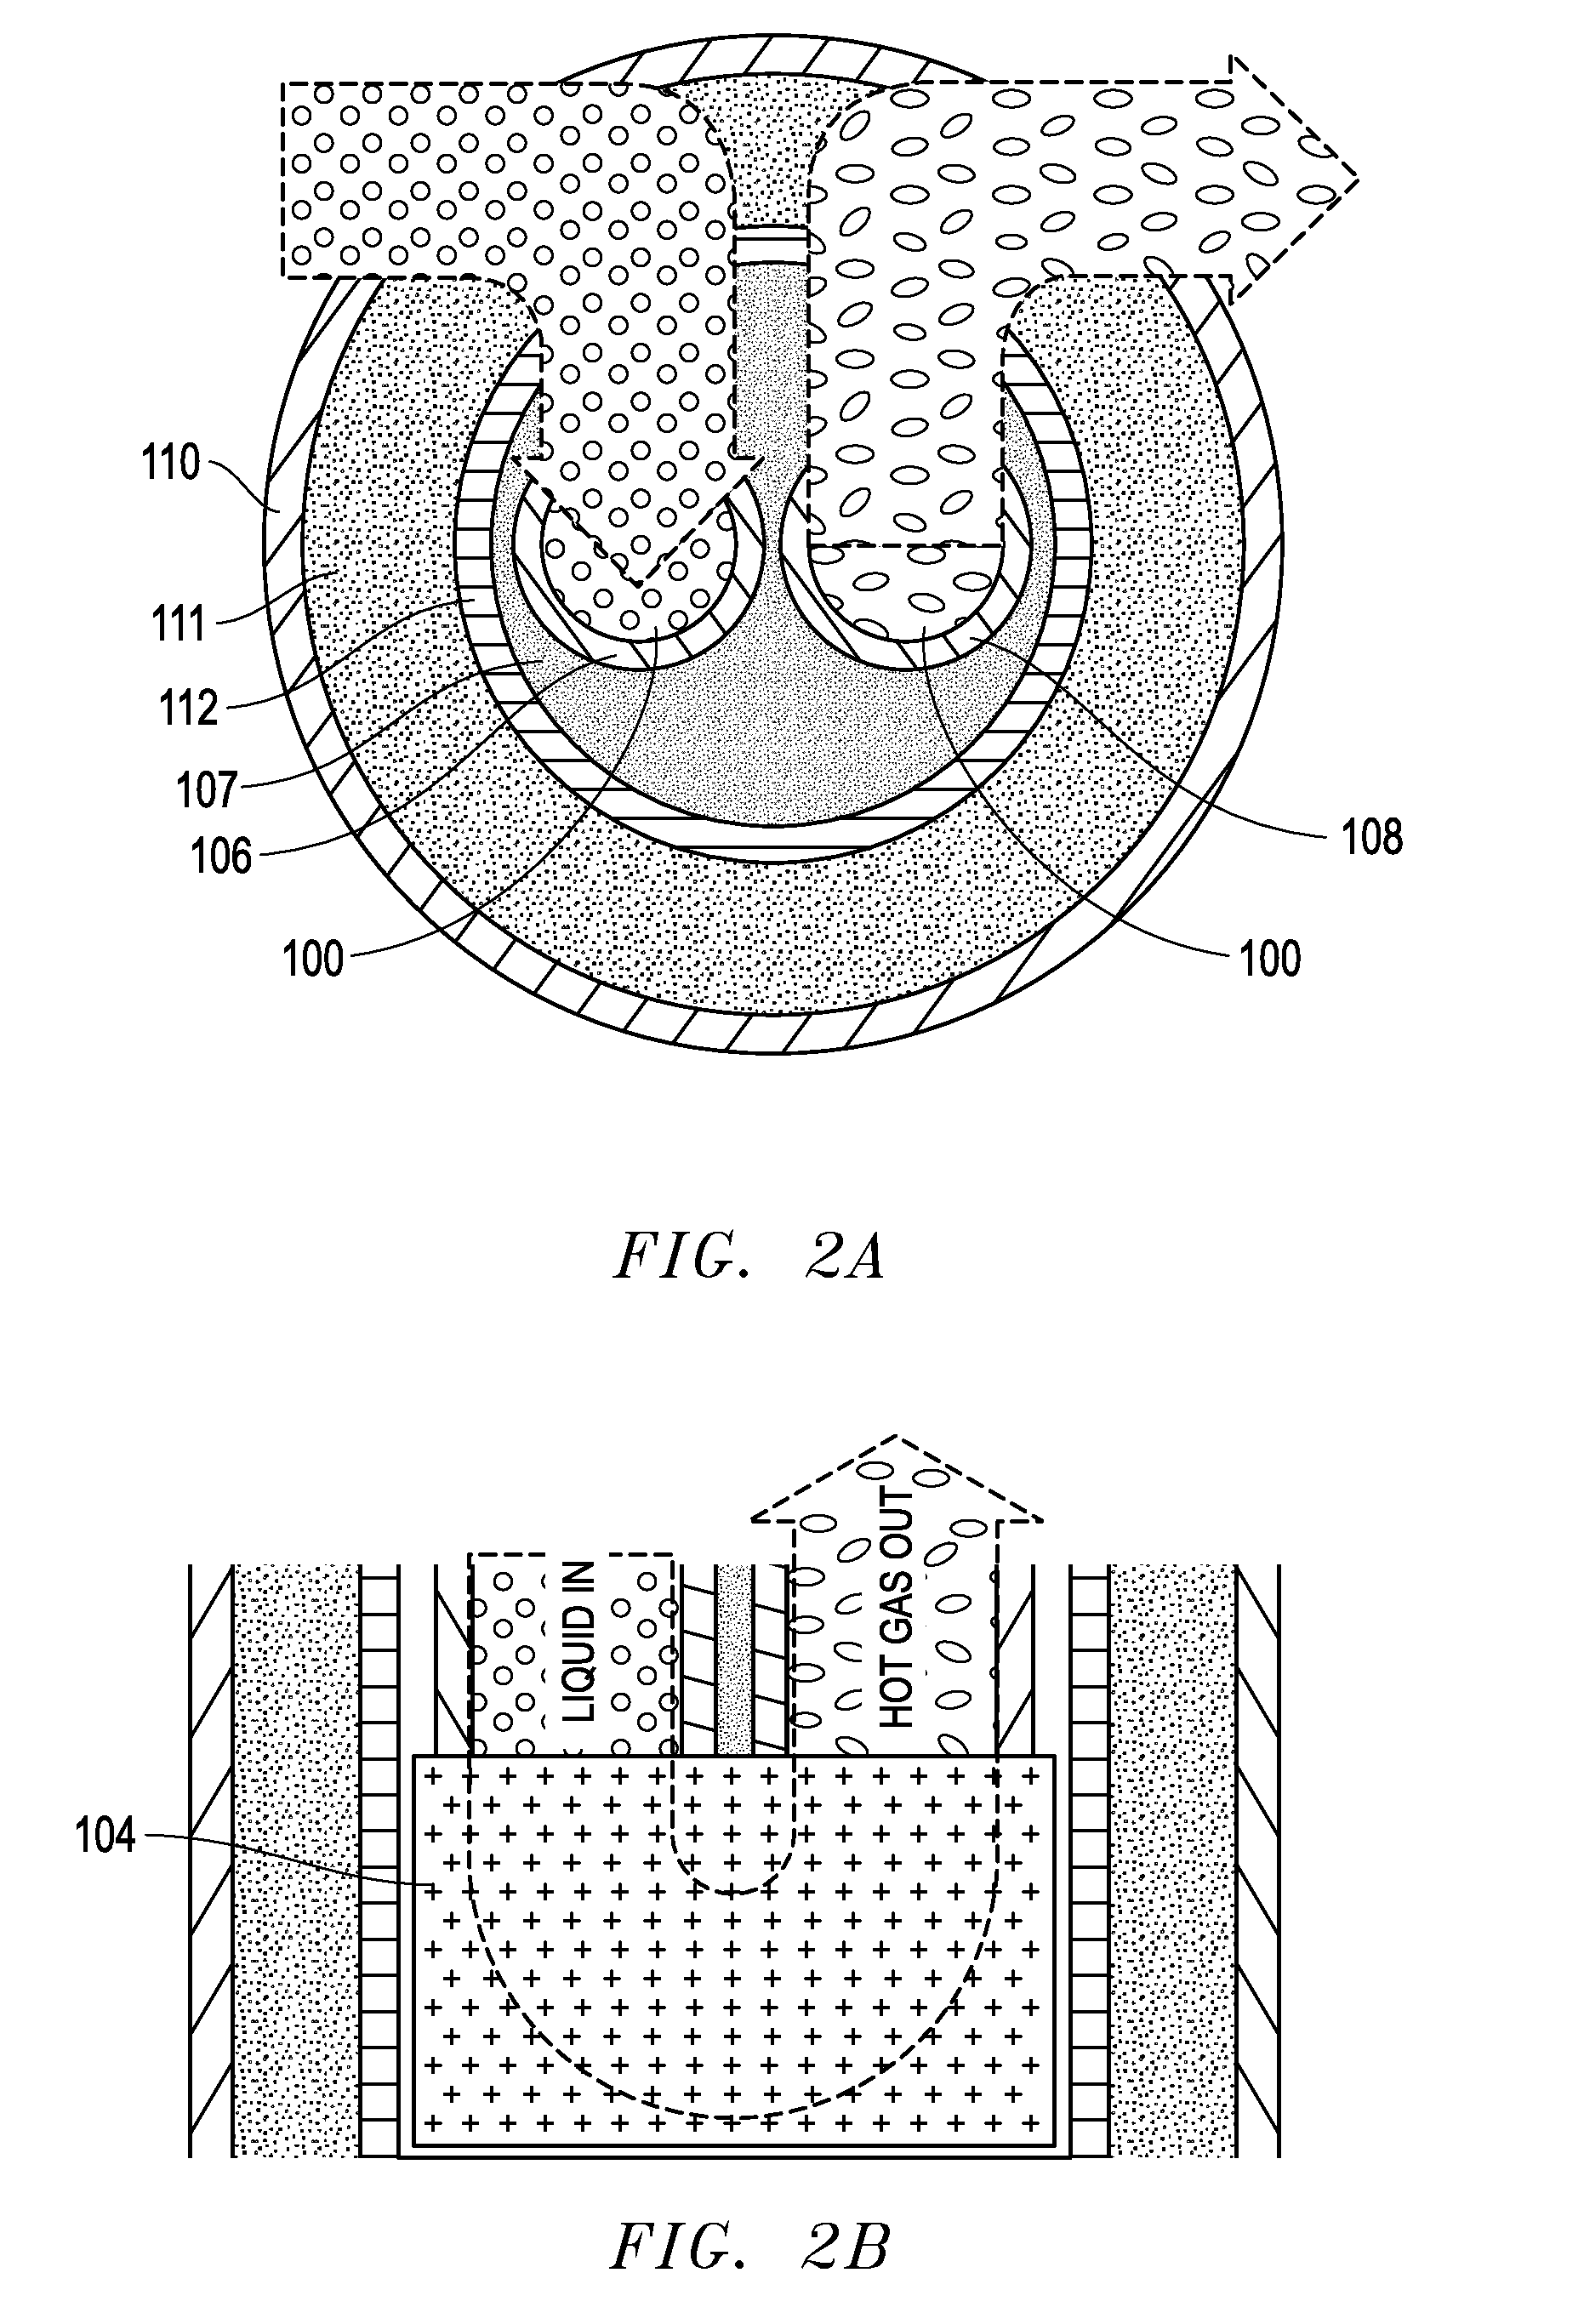 System and method for utilizing oil and gas wells for geothermal power generation